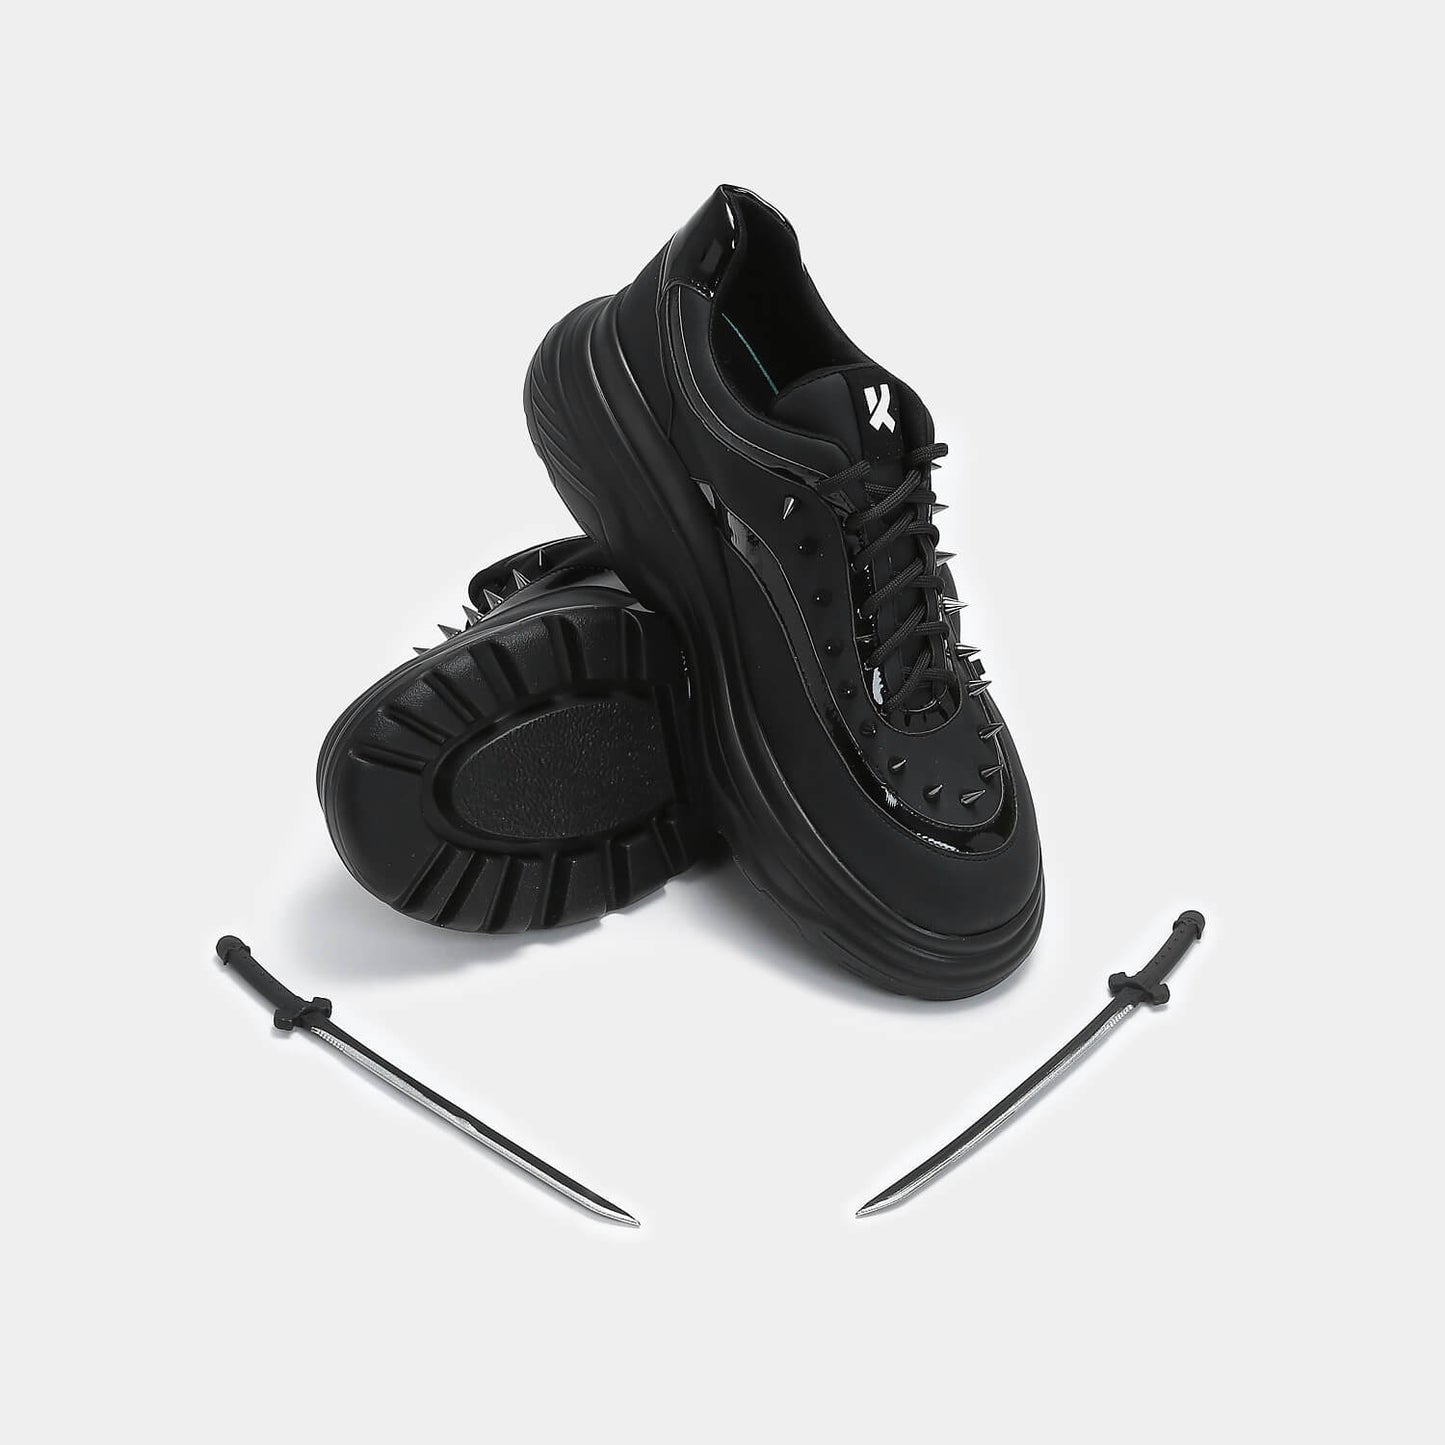 Takeda Sword Trainers - Trainers - KOI Footwear - Black - Sole and Side View